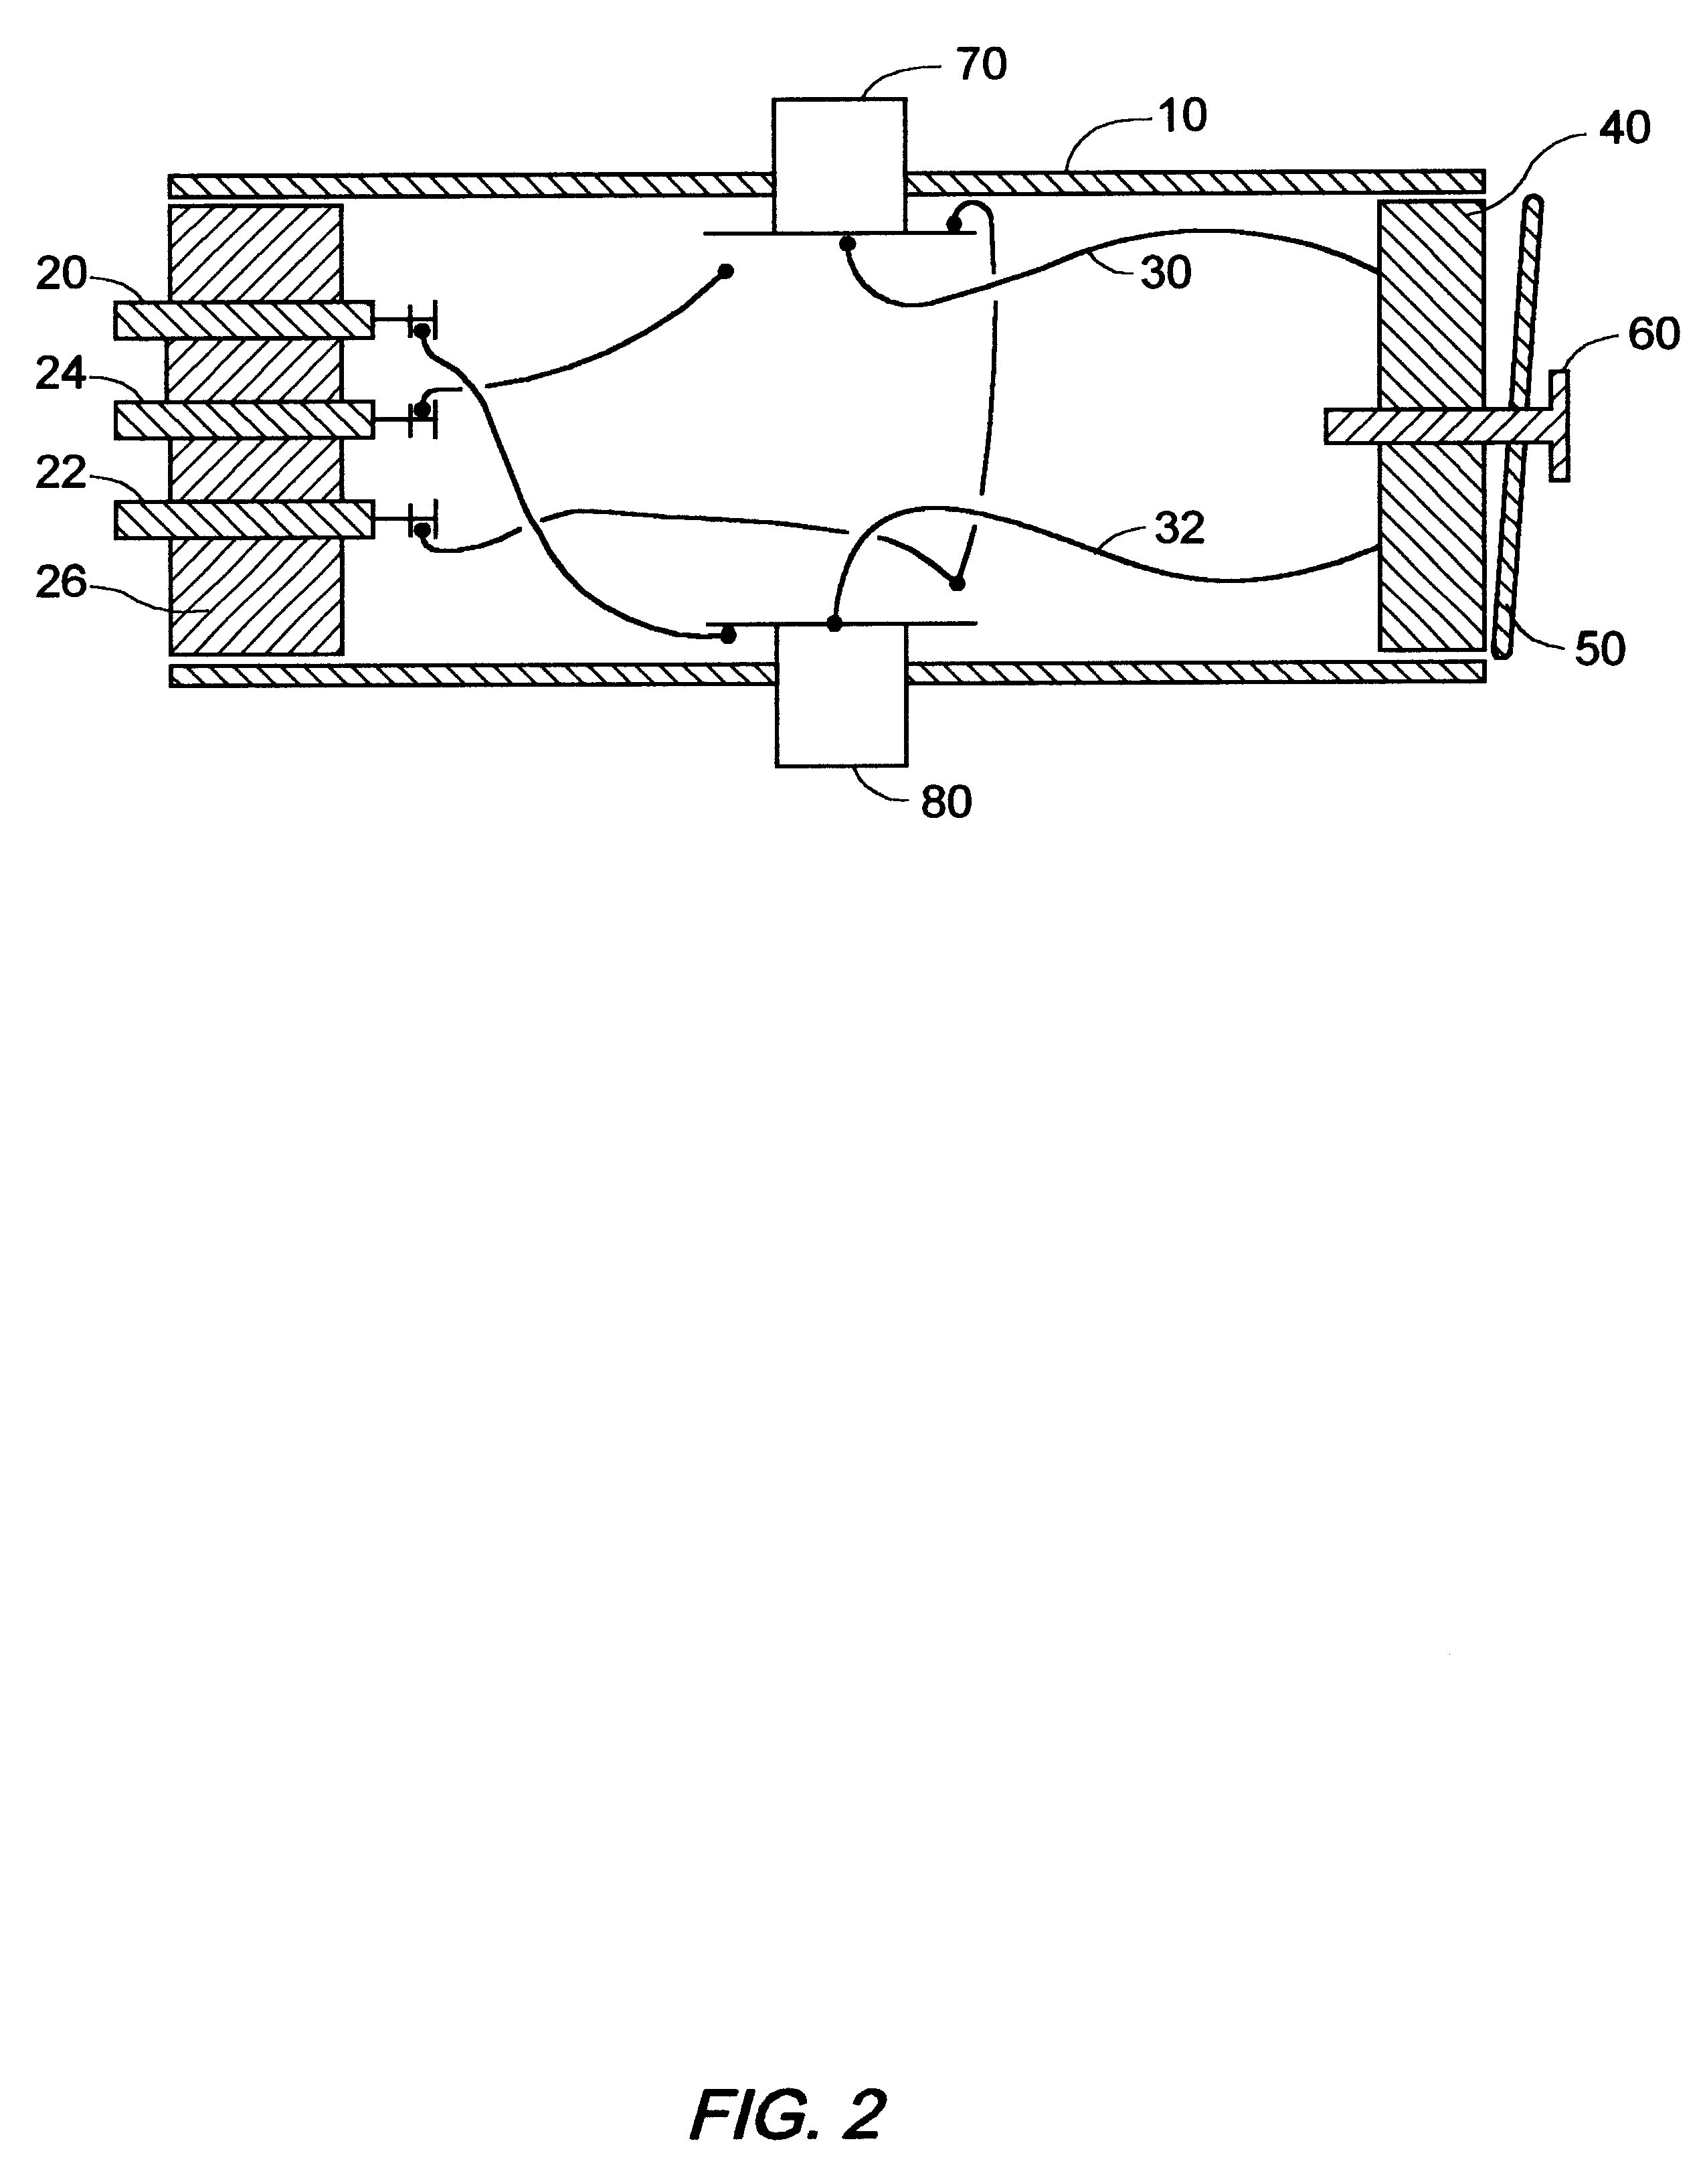 Apparatus for detecting a completed electrical circuit, reverse polarity, ground and ground fault interrupter